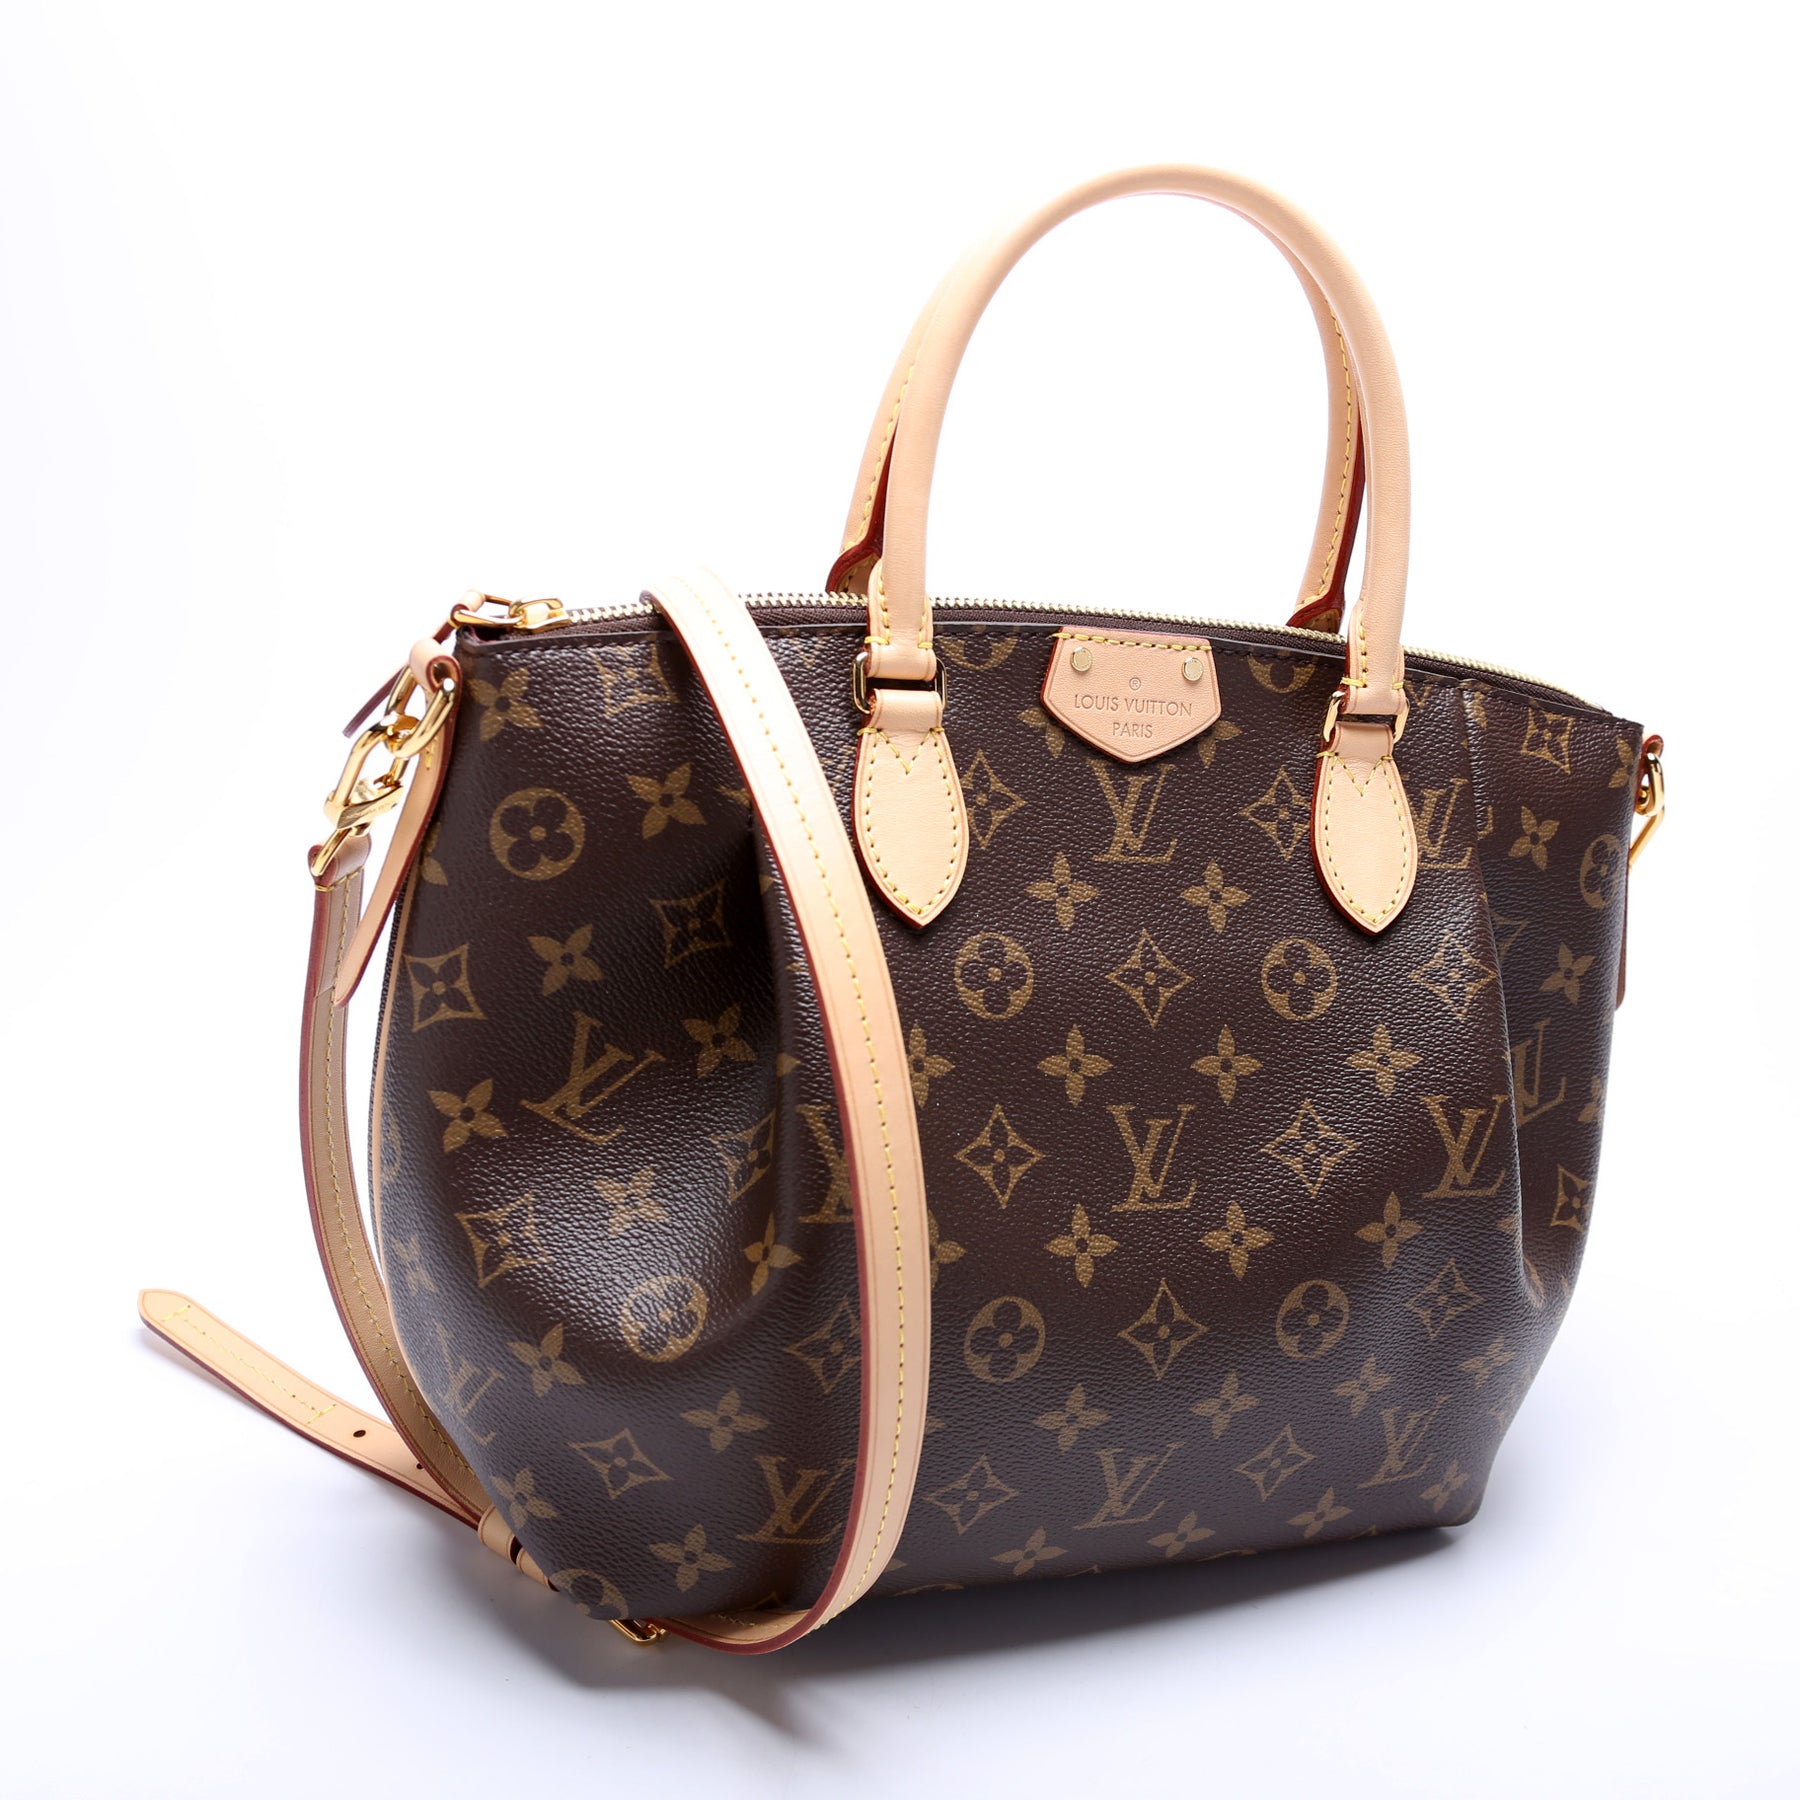 Louis Vuitton 2017 pre-owned Turenne PM Tote Bag - Farfetch